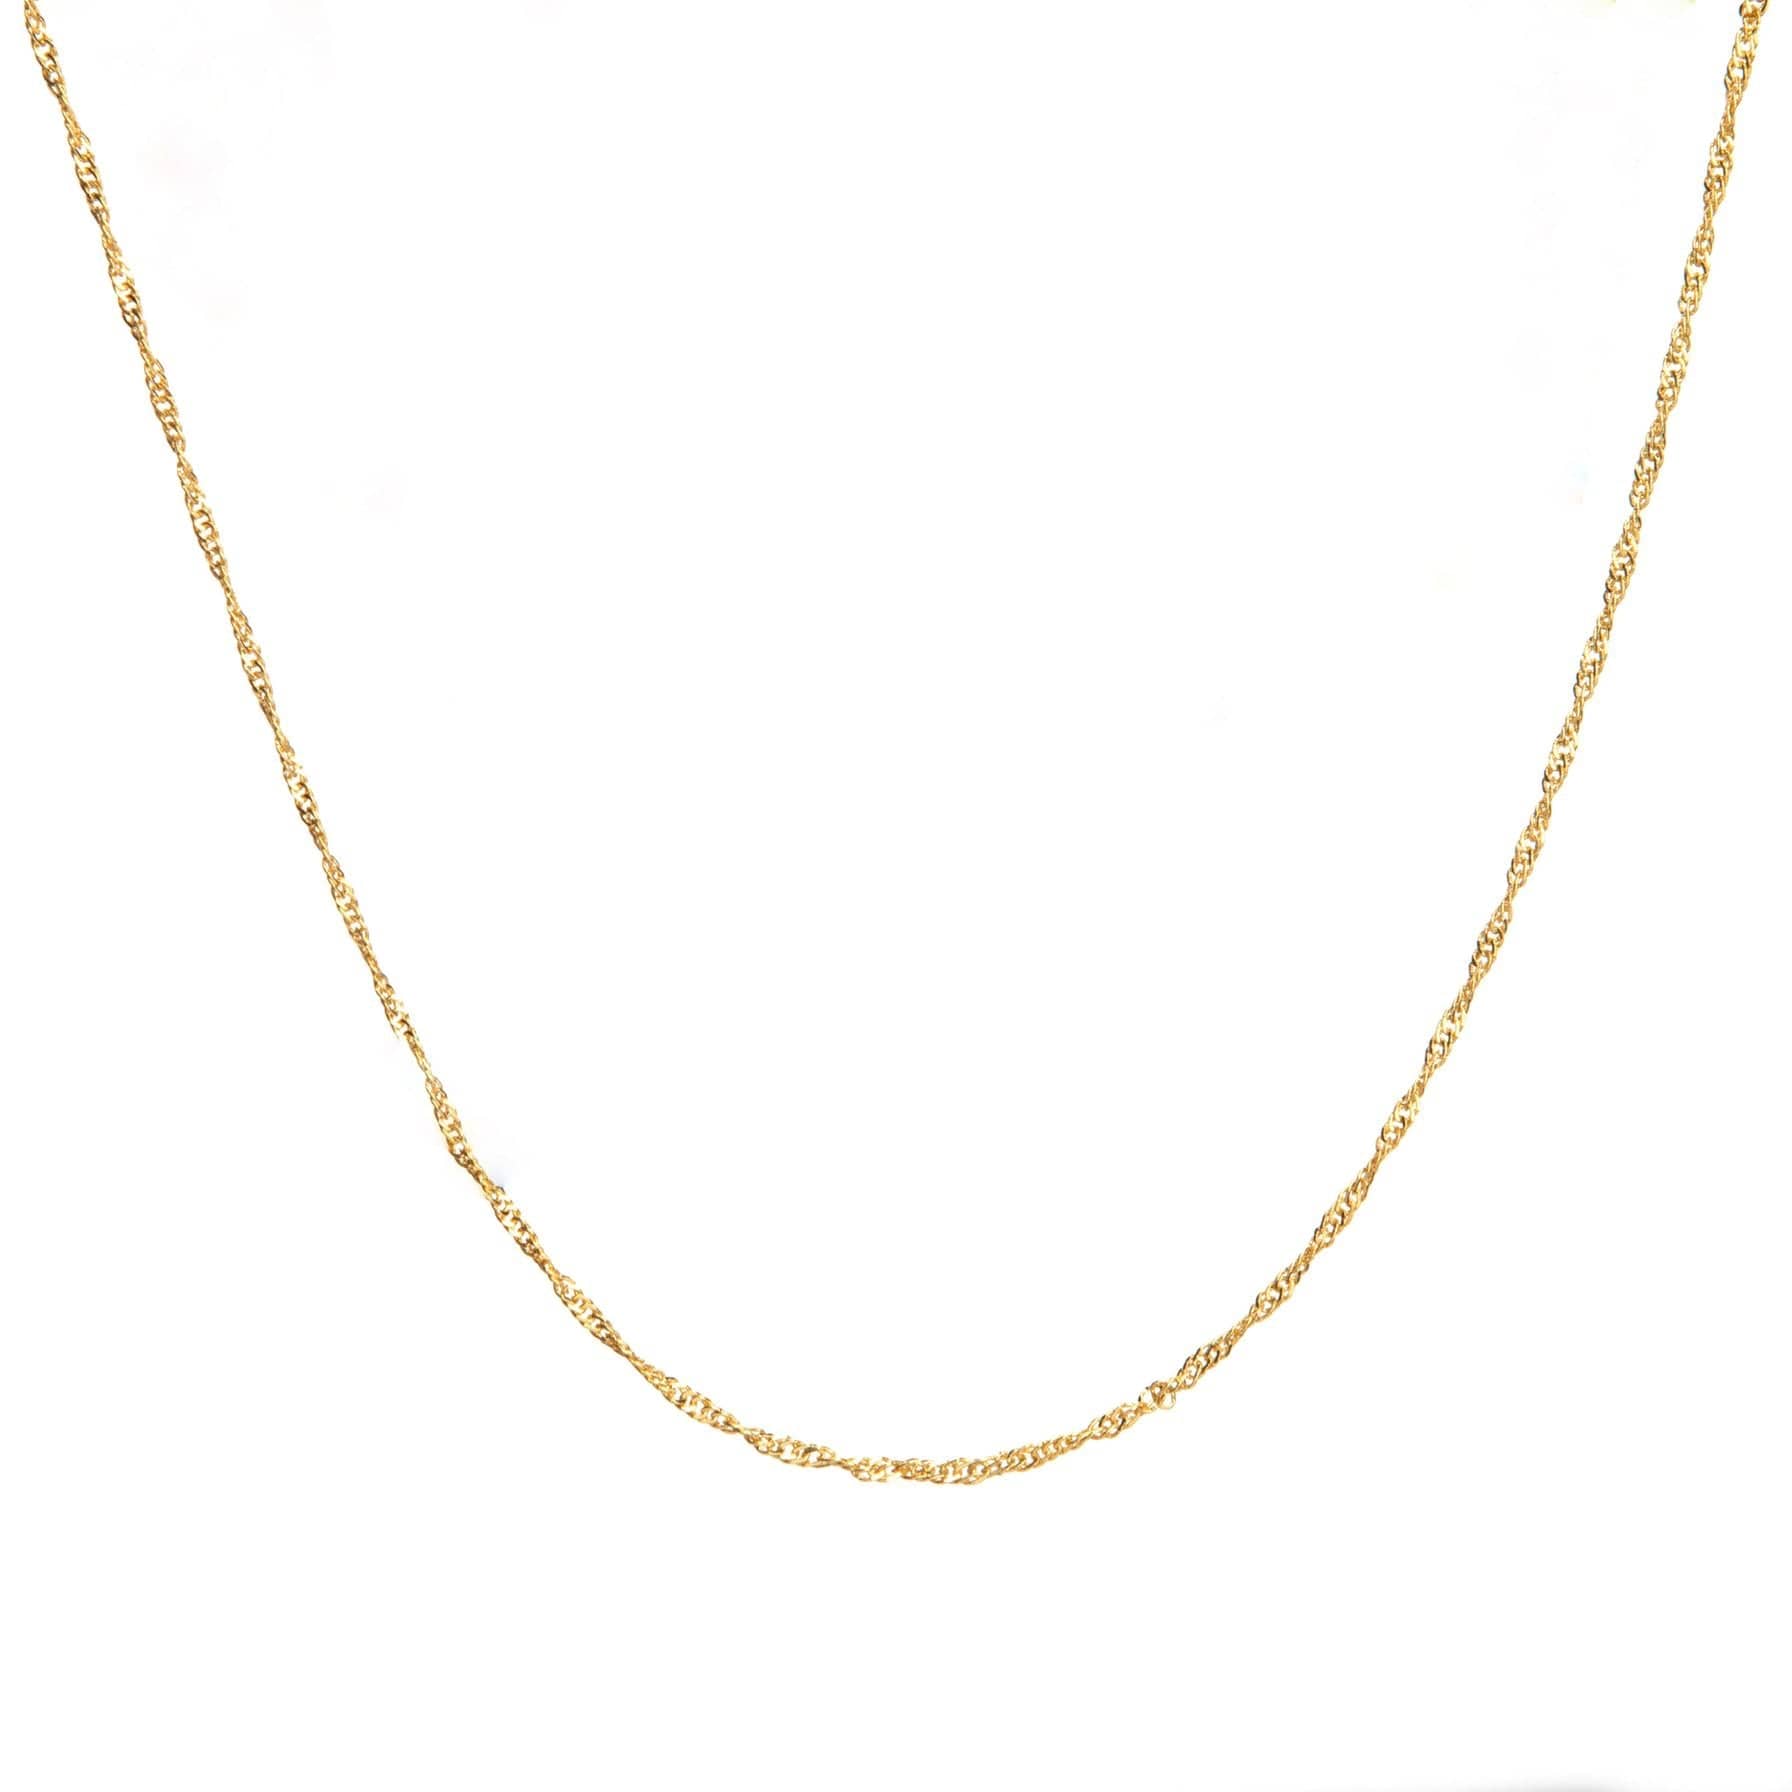 Gold twisted fine chain